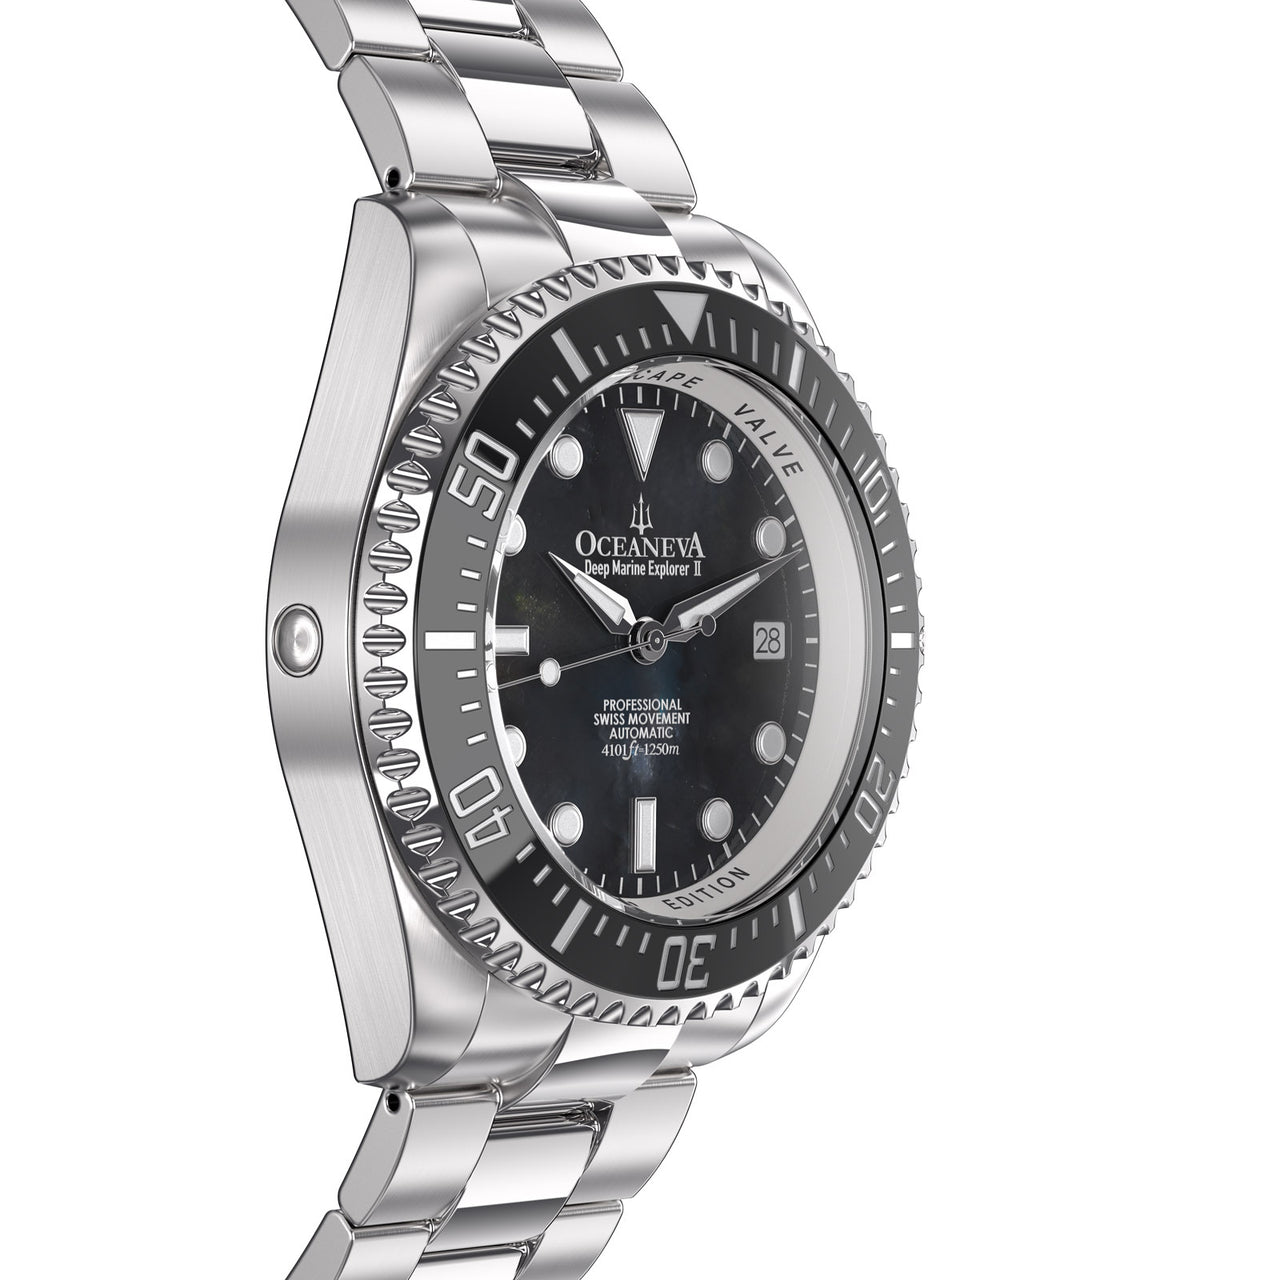 Oceaneva 1250M Dive Watch Black Mother of Pearl Side Helium Escape Valve View